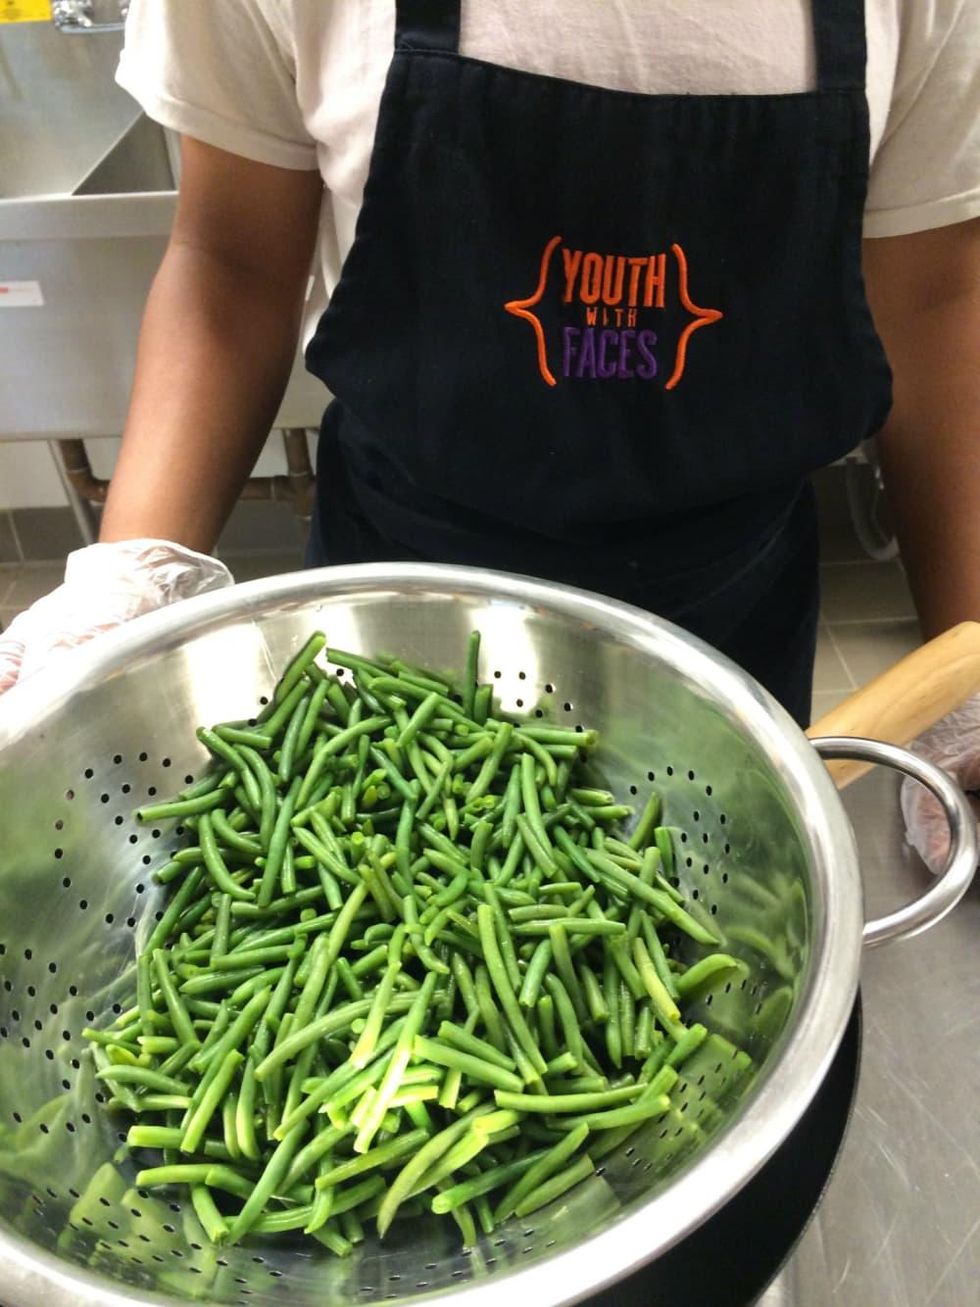 Youth in the culinary program learn how to cook and prepare healthy foods